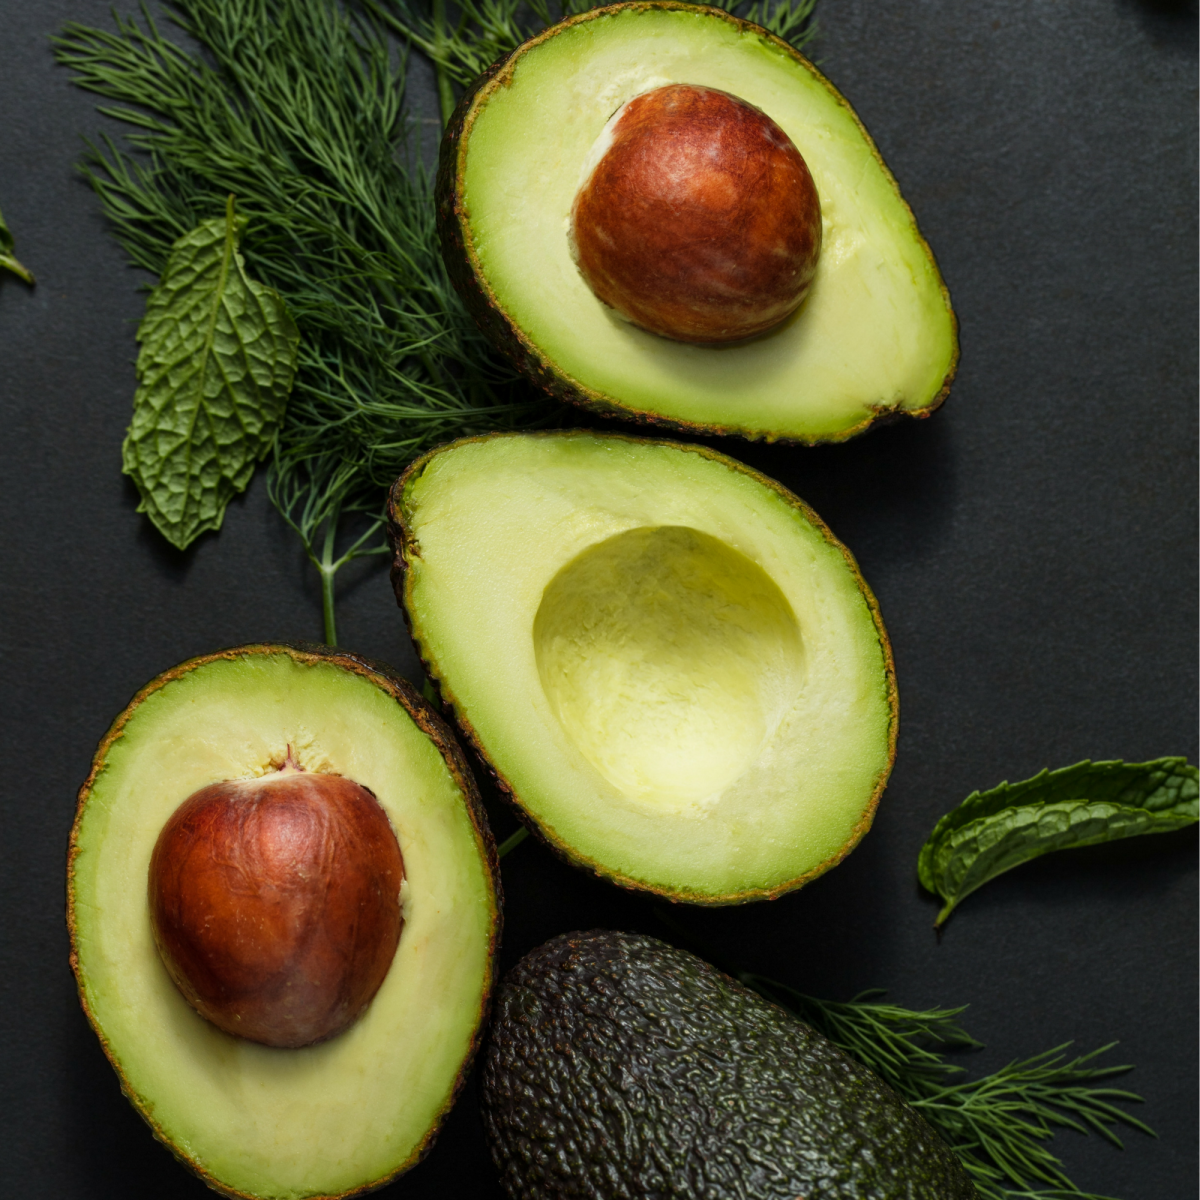 easy recipes with avocados - MomTrends